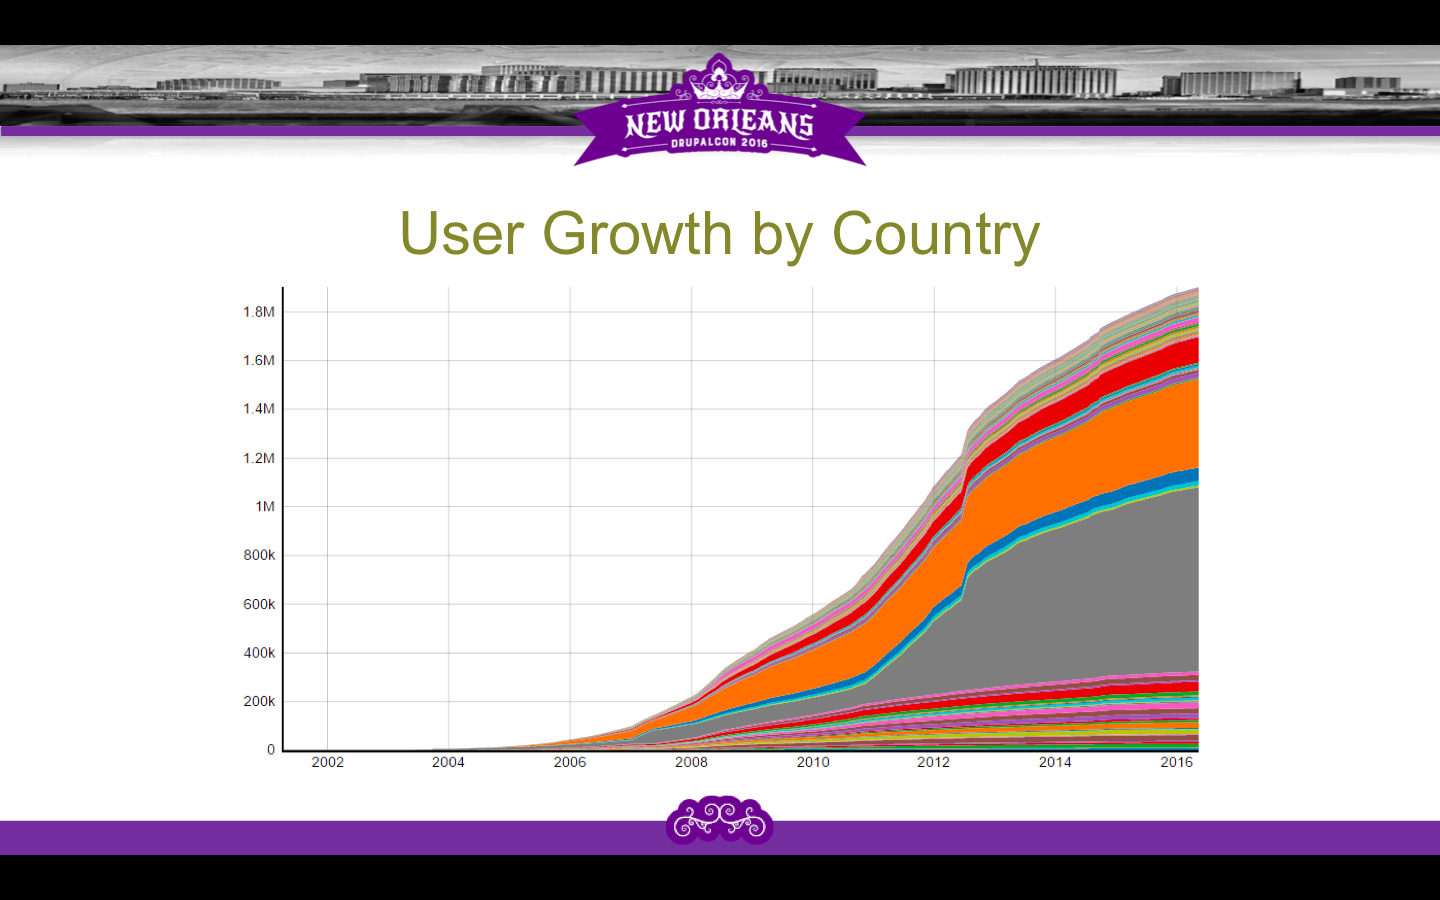 Drupal user growth by country